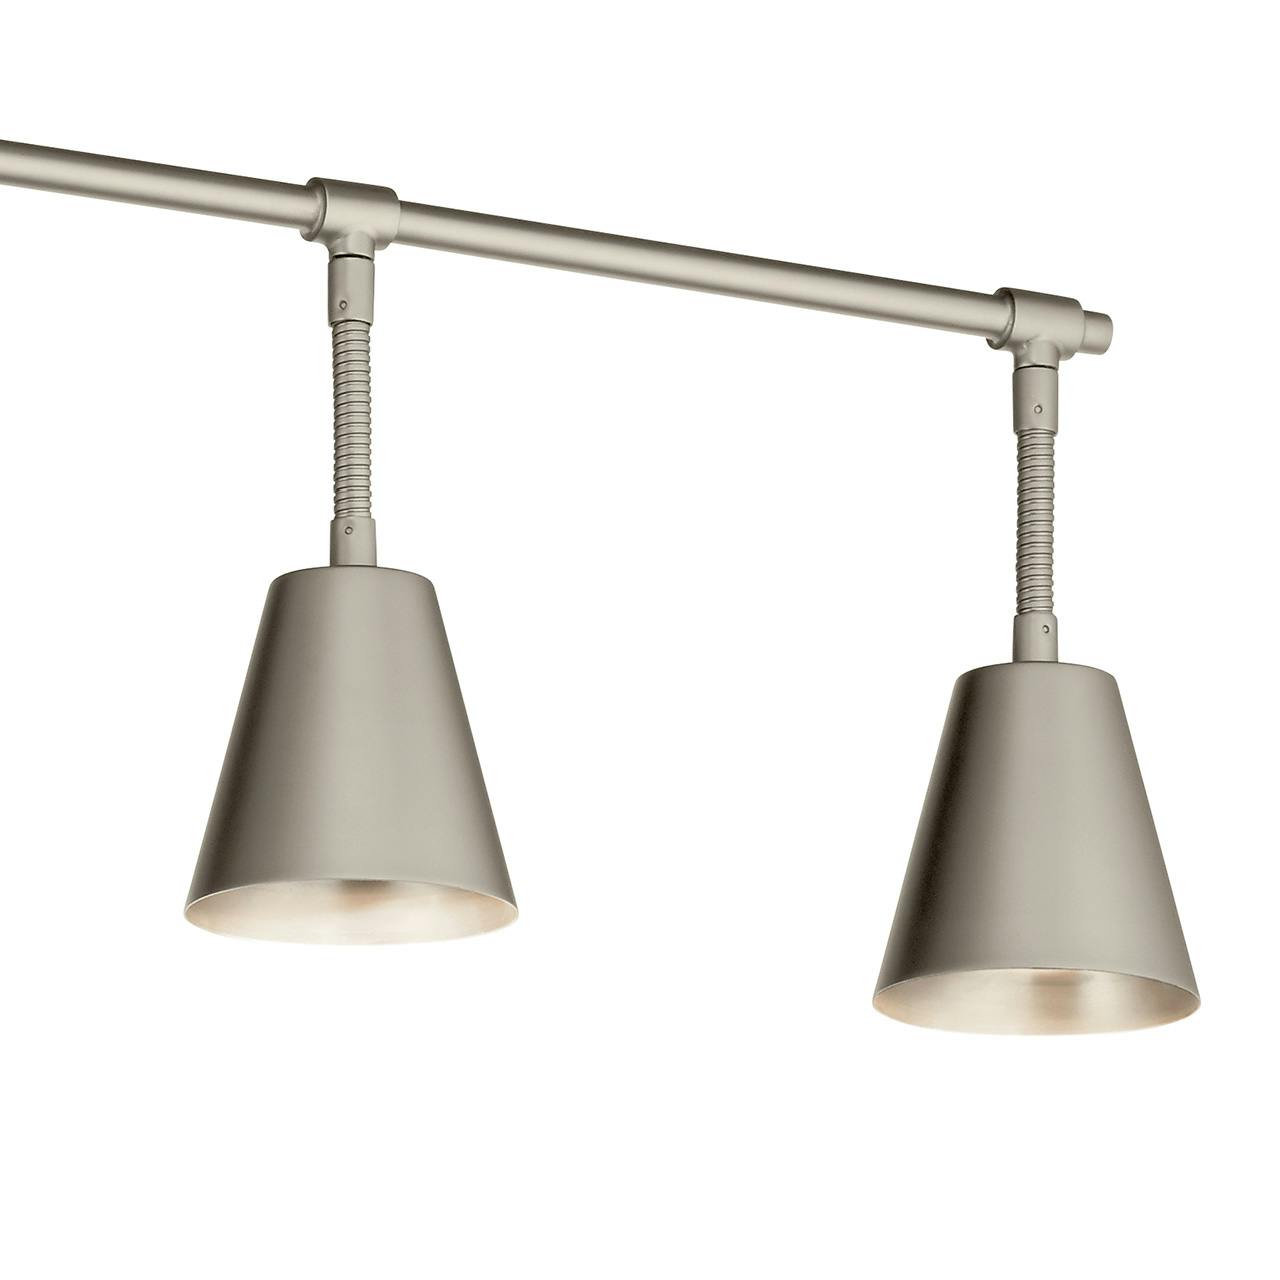 Close up view of the Sylvia™ 6 Light Rail Light Satin Nickel on a white background